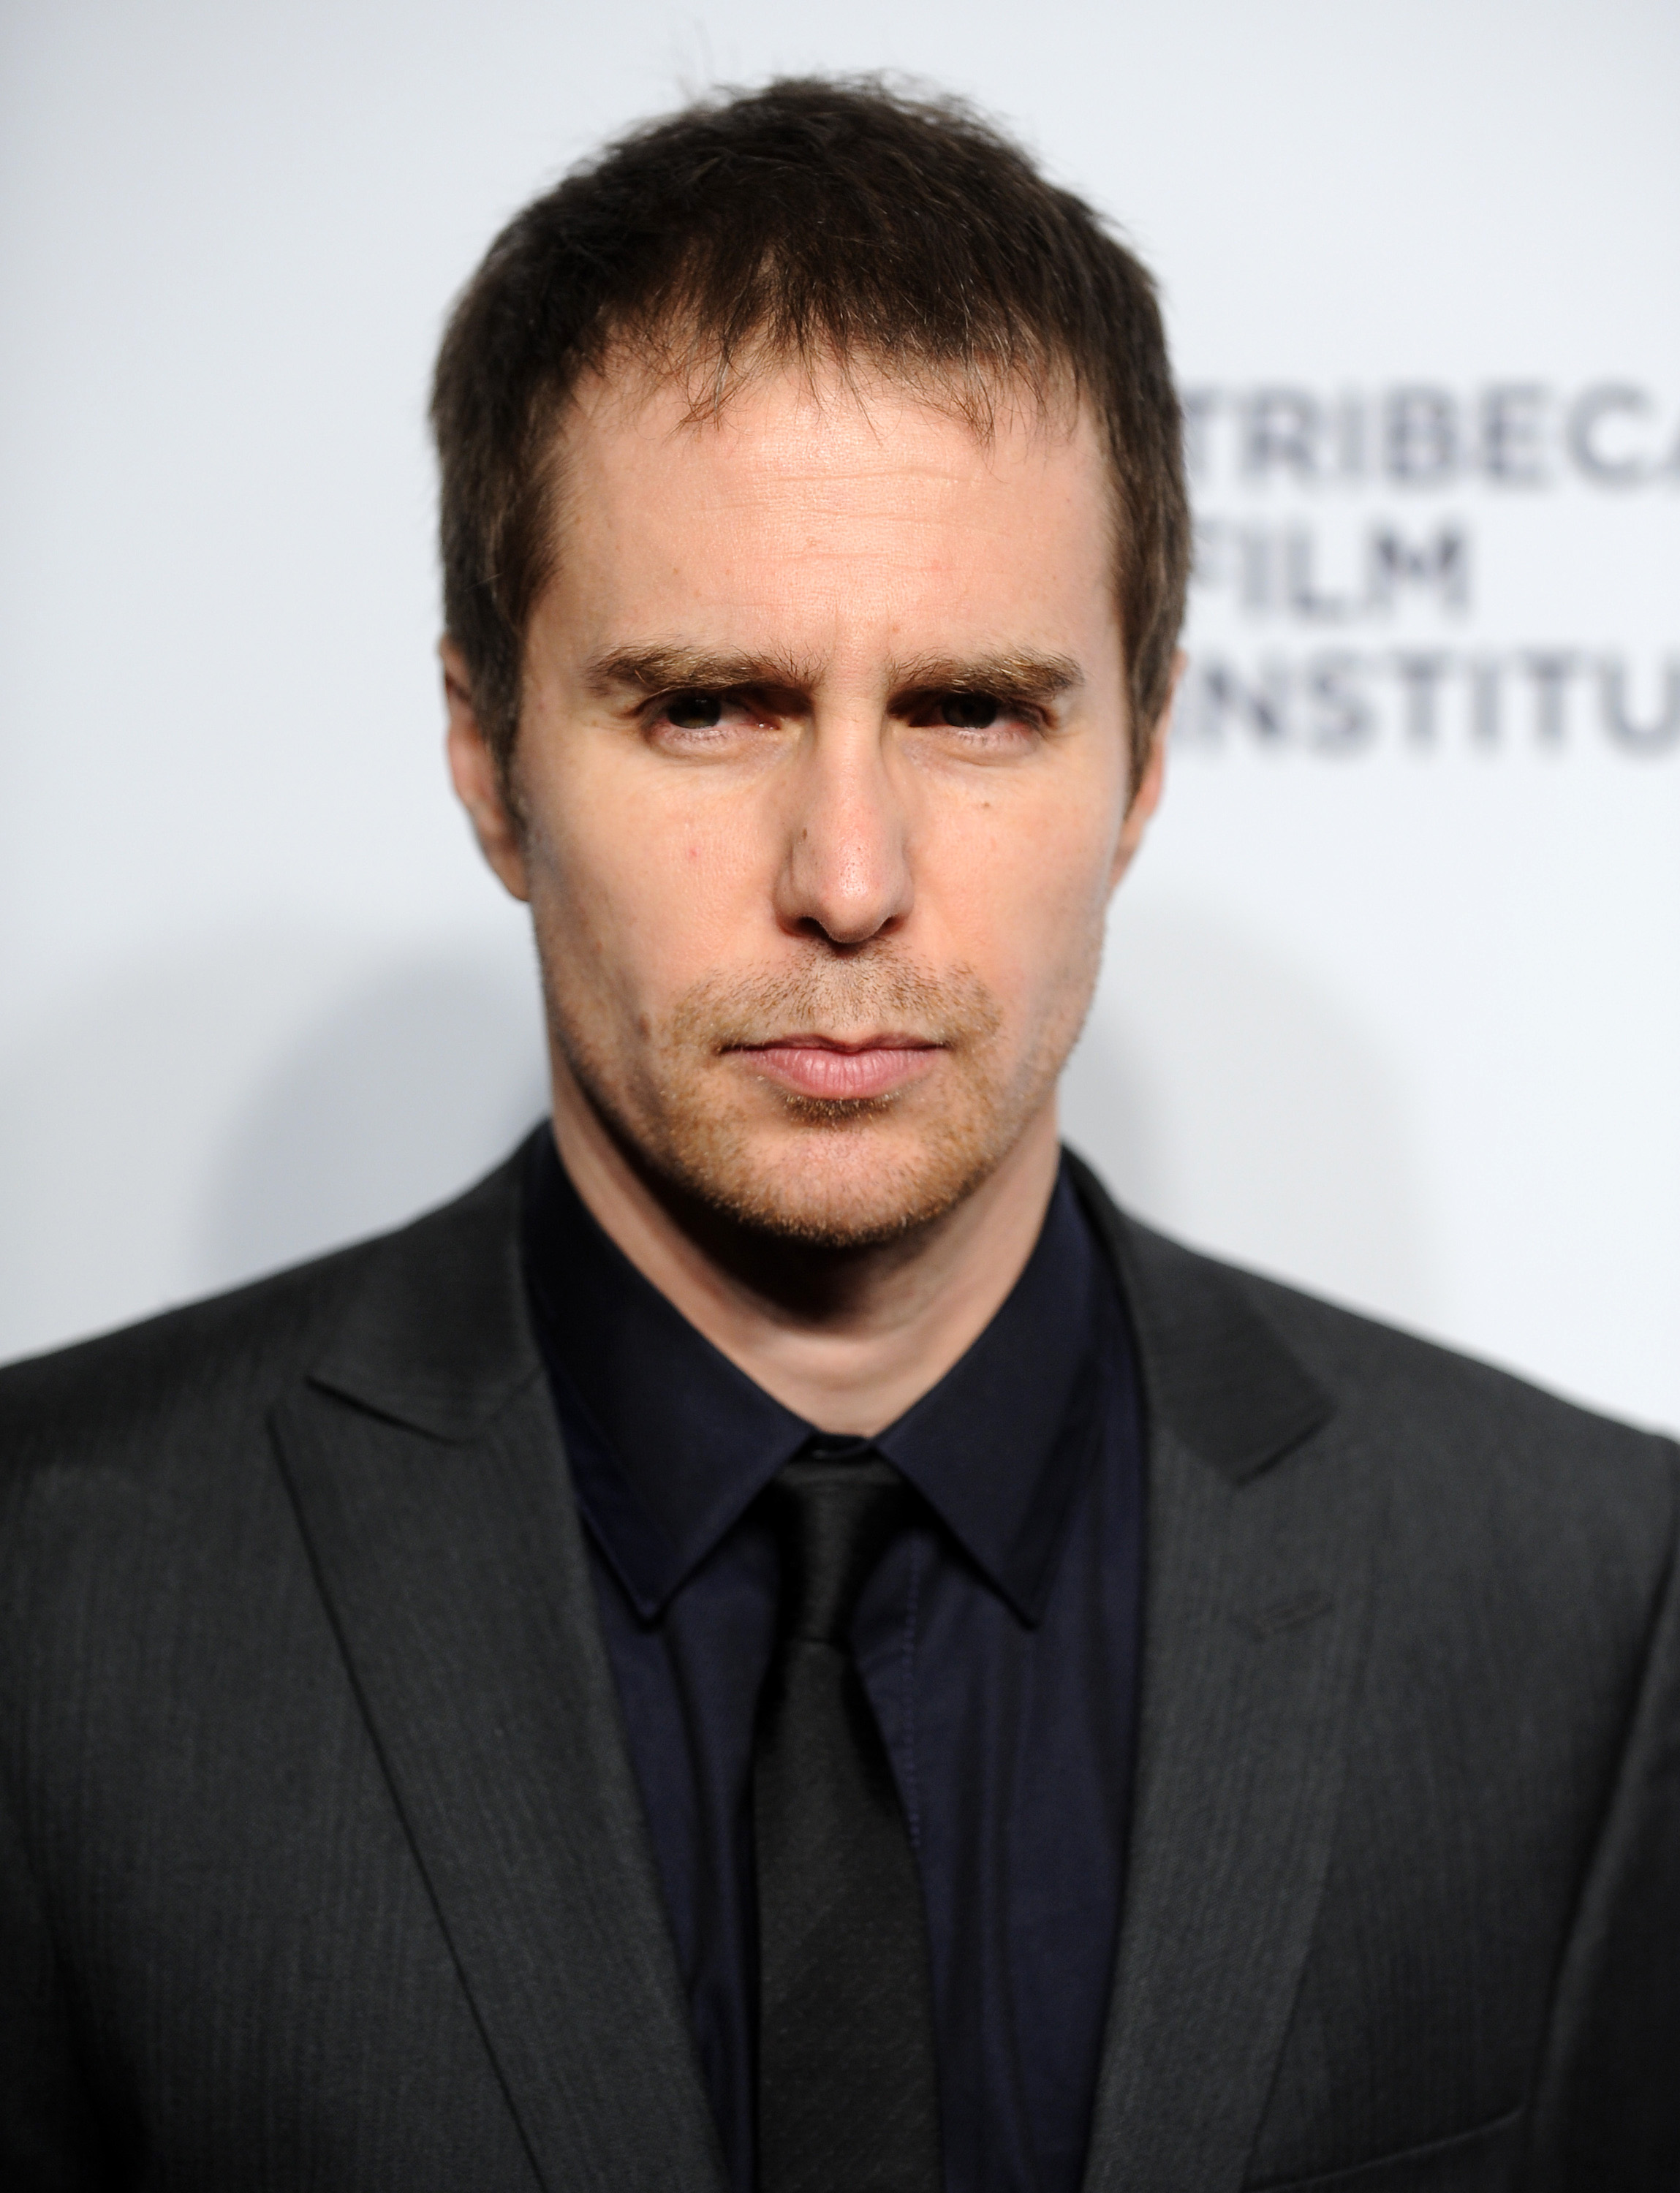 HQ Sam Rockwell Wallpapers | File 967.29Kb